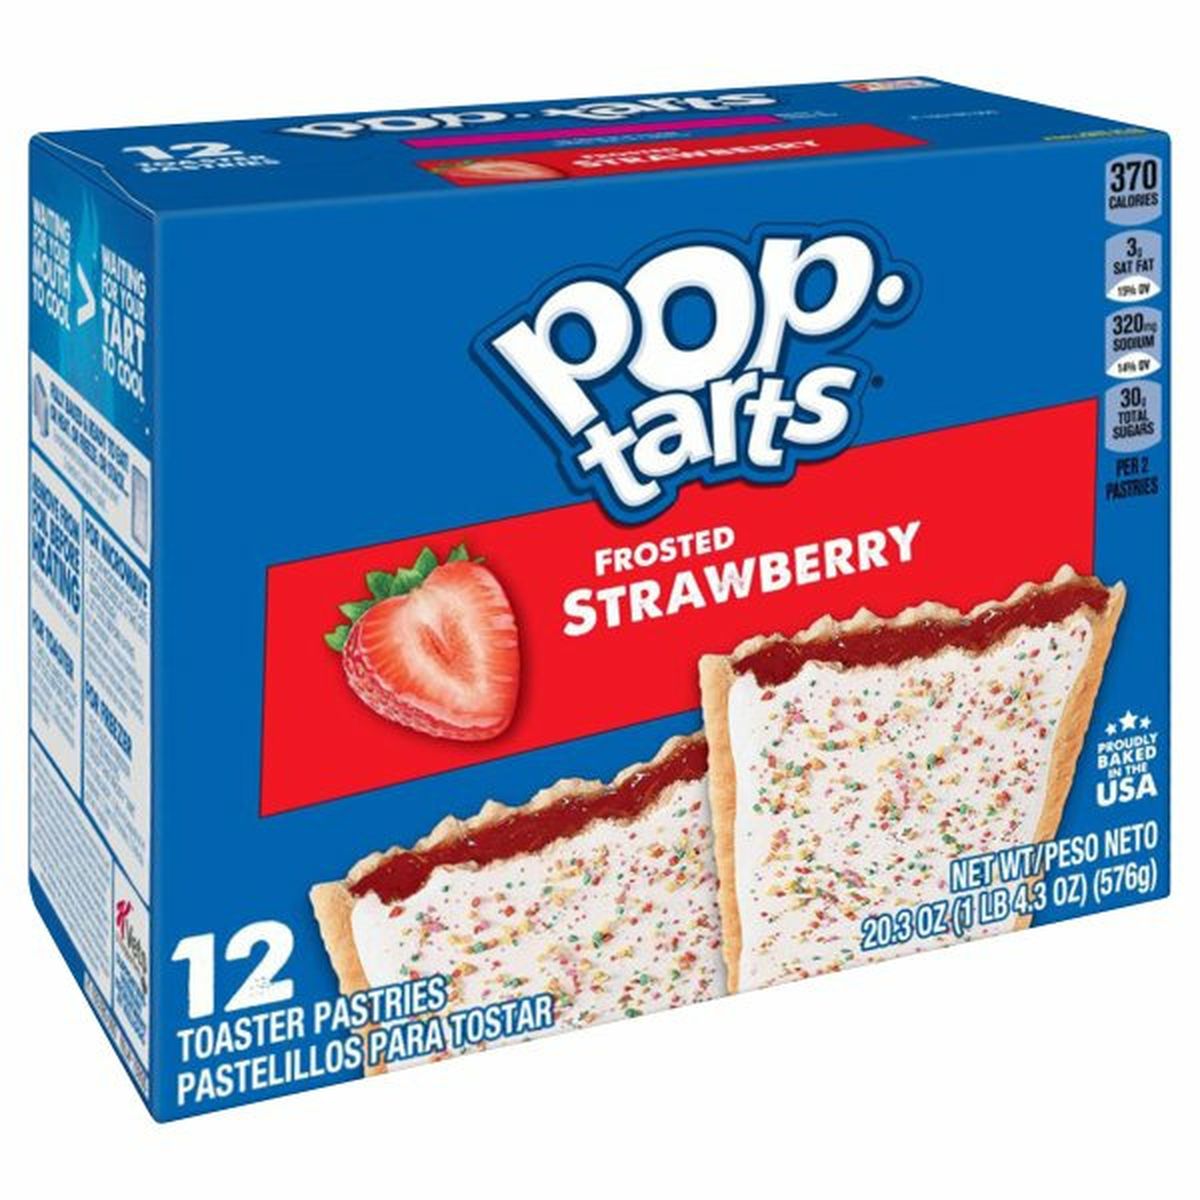 Calories in Kellogg's Pop-Tarts Toaster Pastries Breakfast Toaster Pastries, Frosted Strawberry, Proudly Baked in the USA